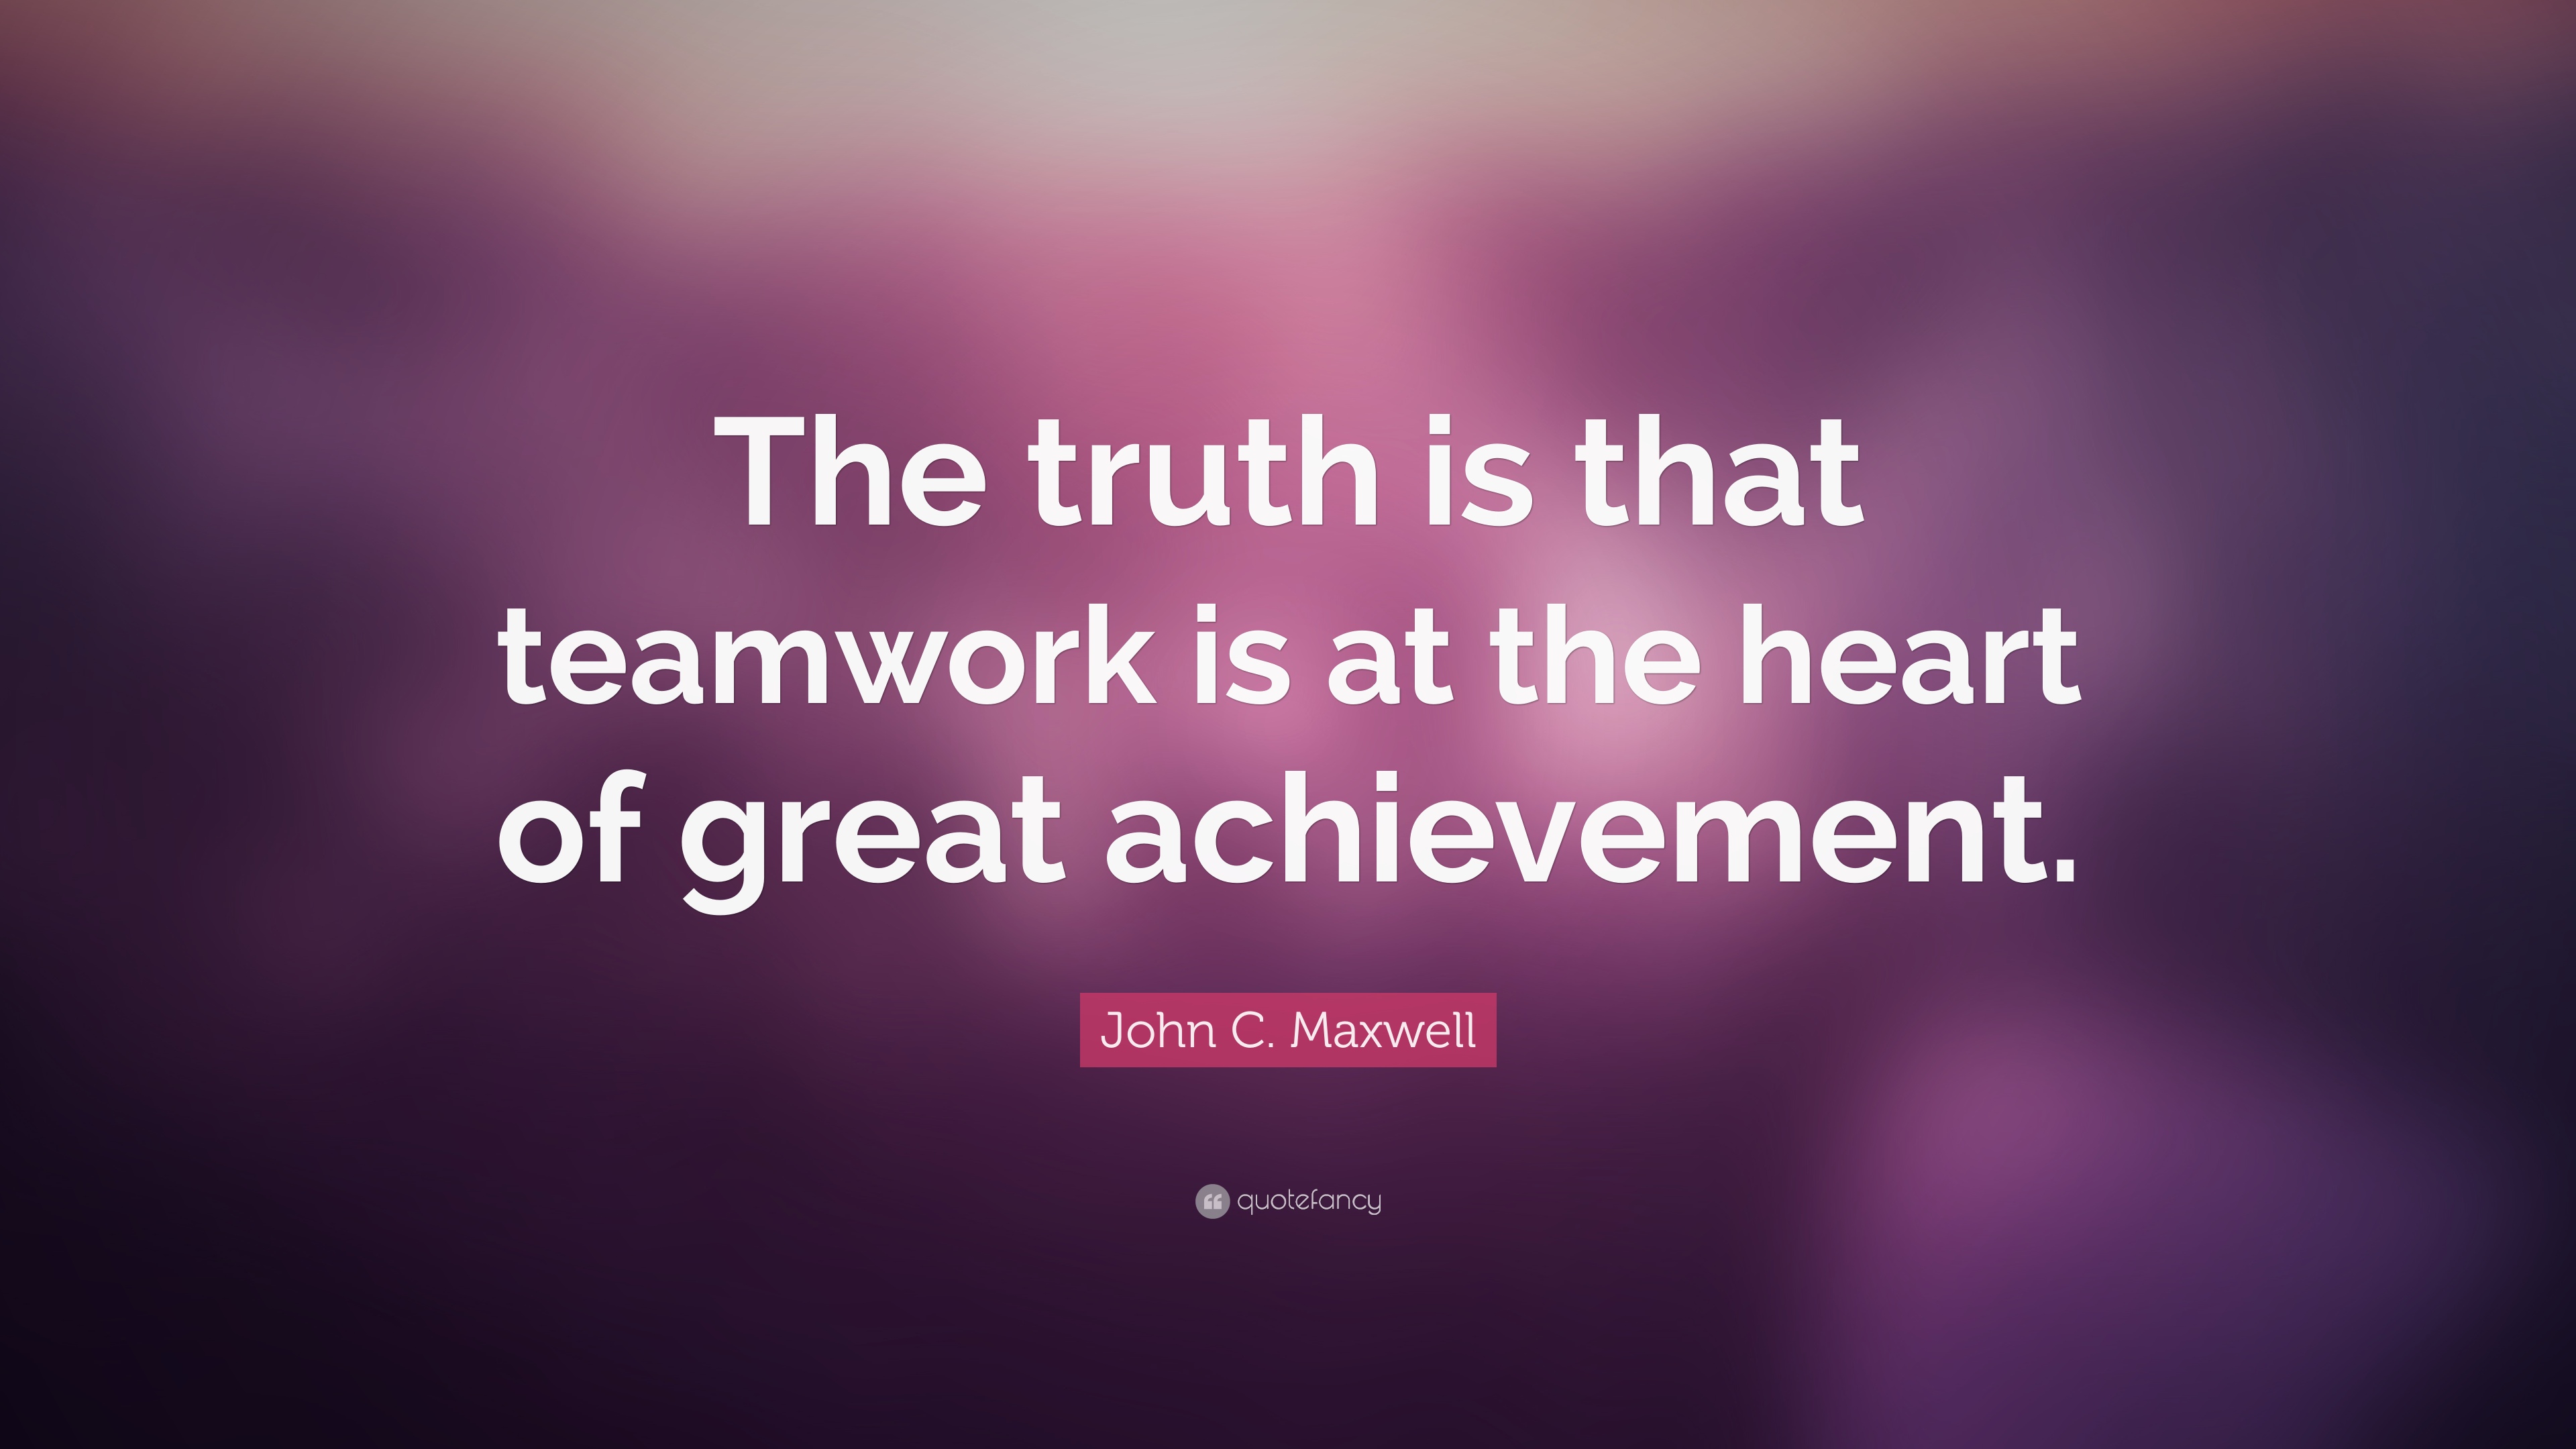 the truth is that teamwork is at the heart of great achievement. john c. maxwell